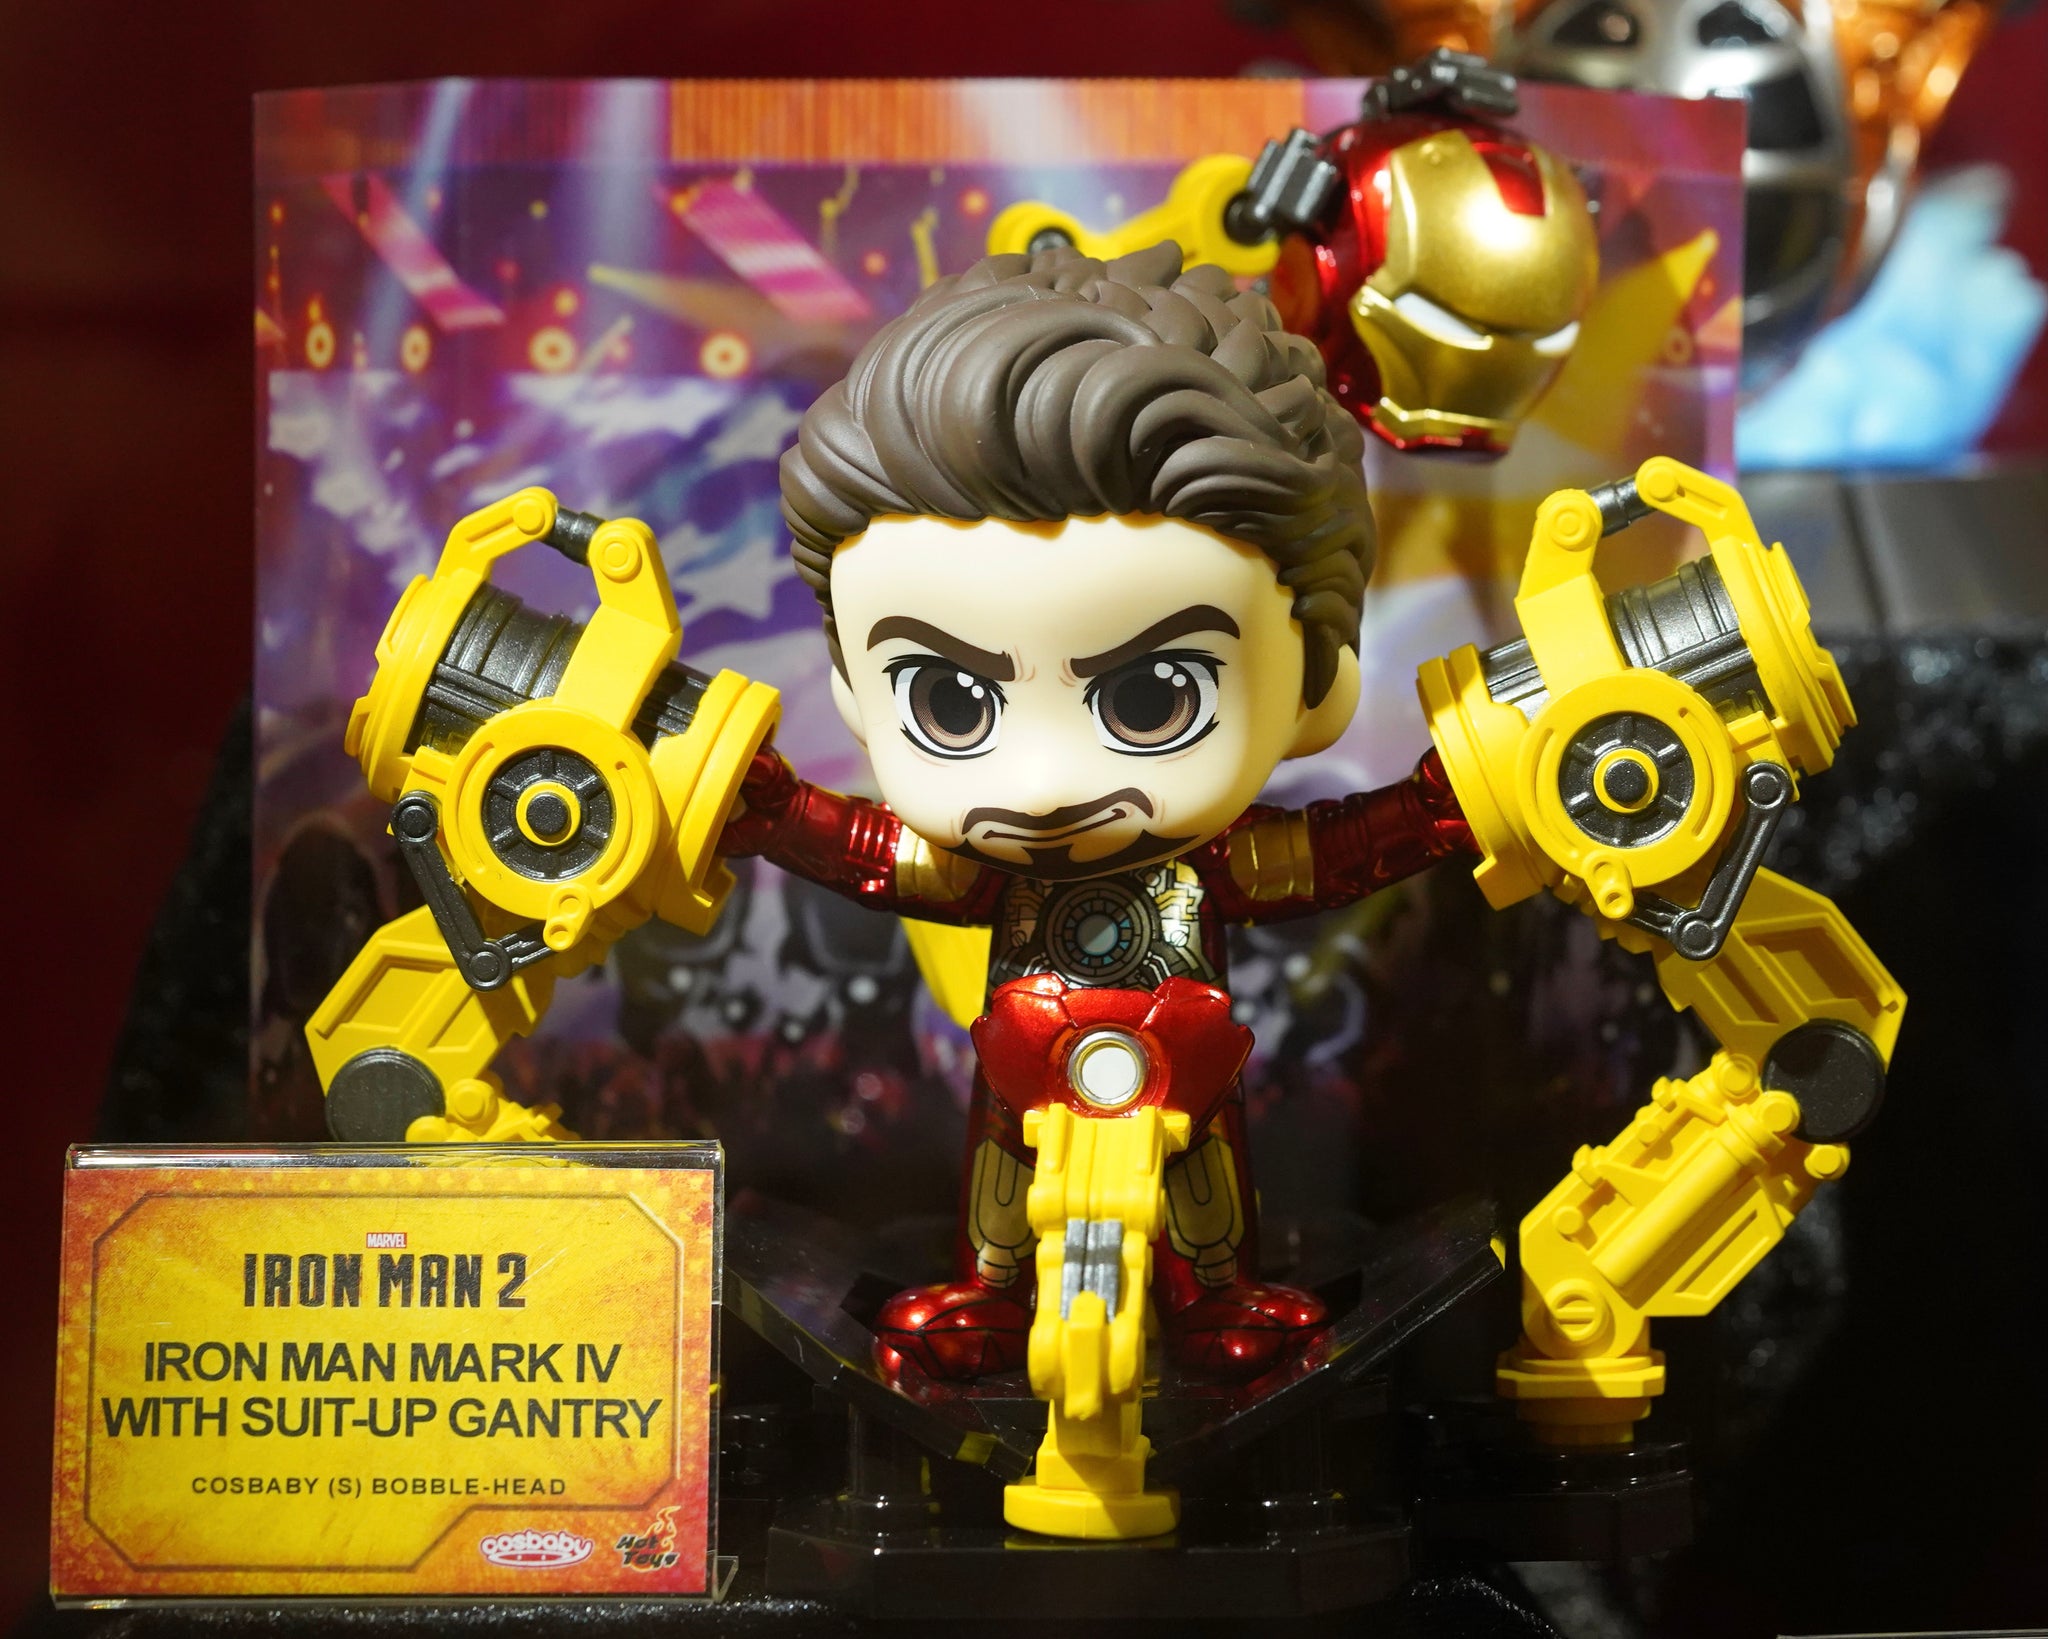 Hot toys COSB868 Iron Man Mark IV with Suit-Up Gantry Cosbaby (S)  Bobble-Head